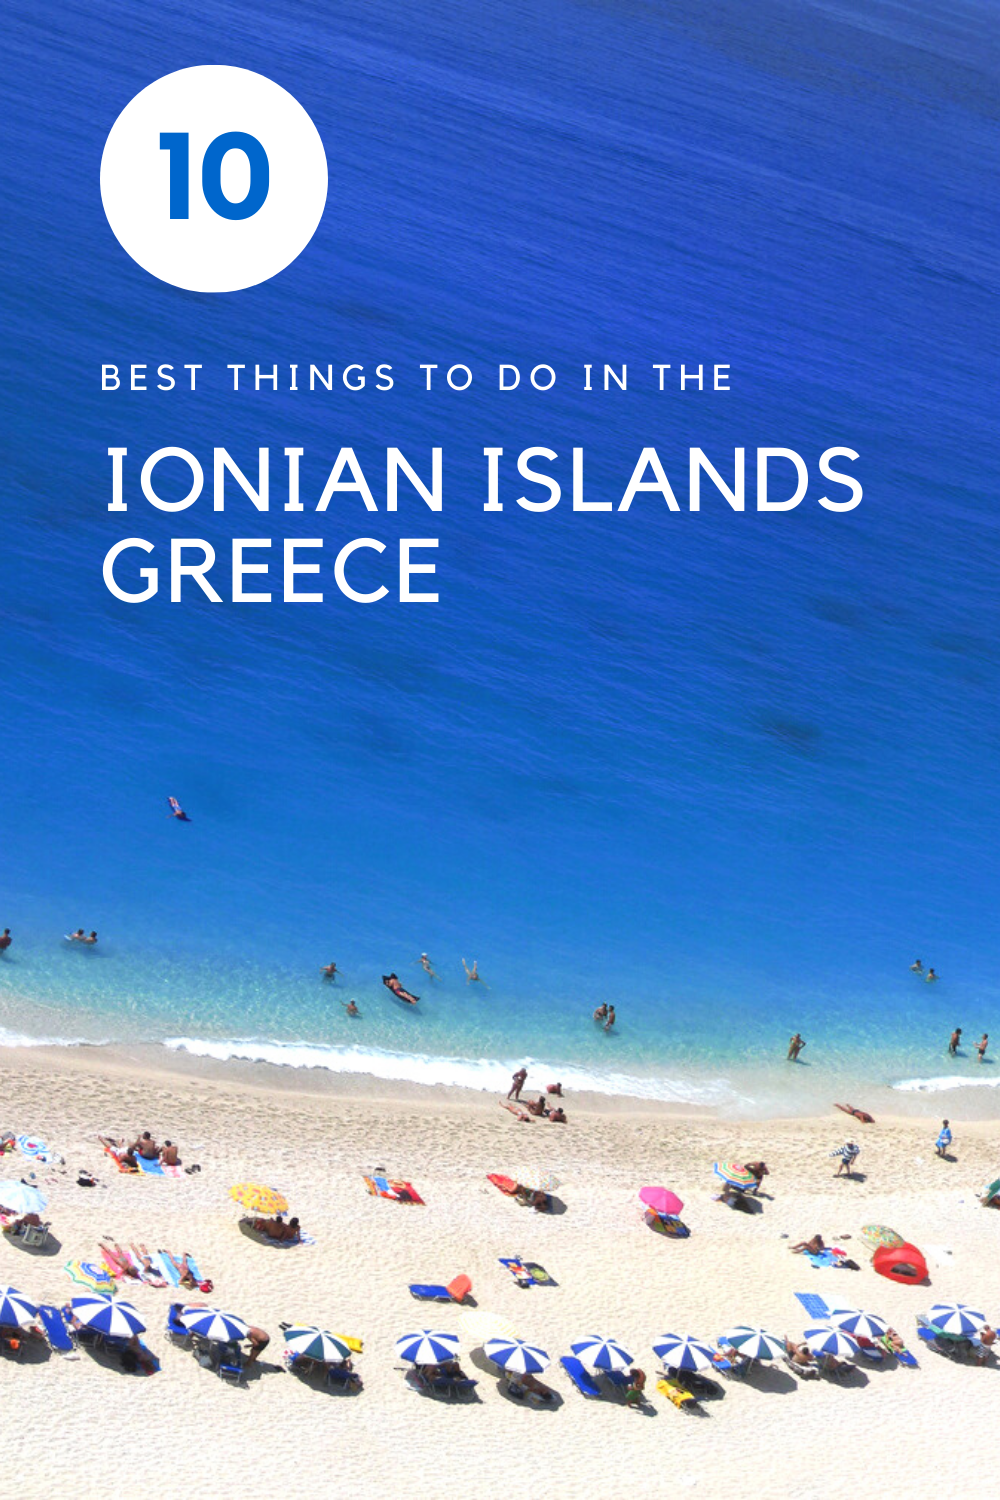 10 Best Things to do in the Ionian Islands, Greece